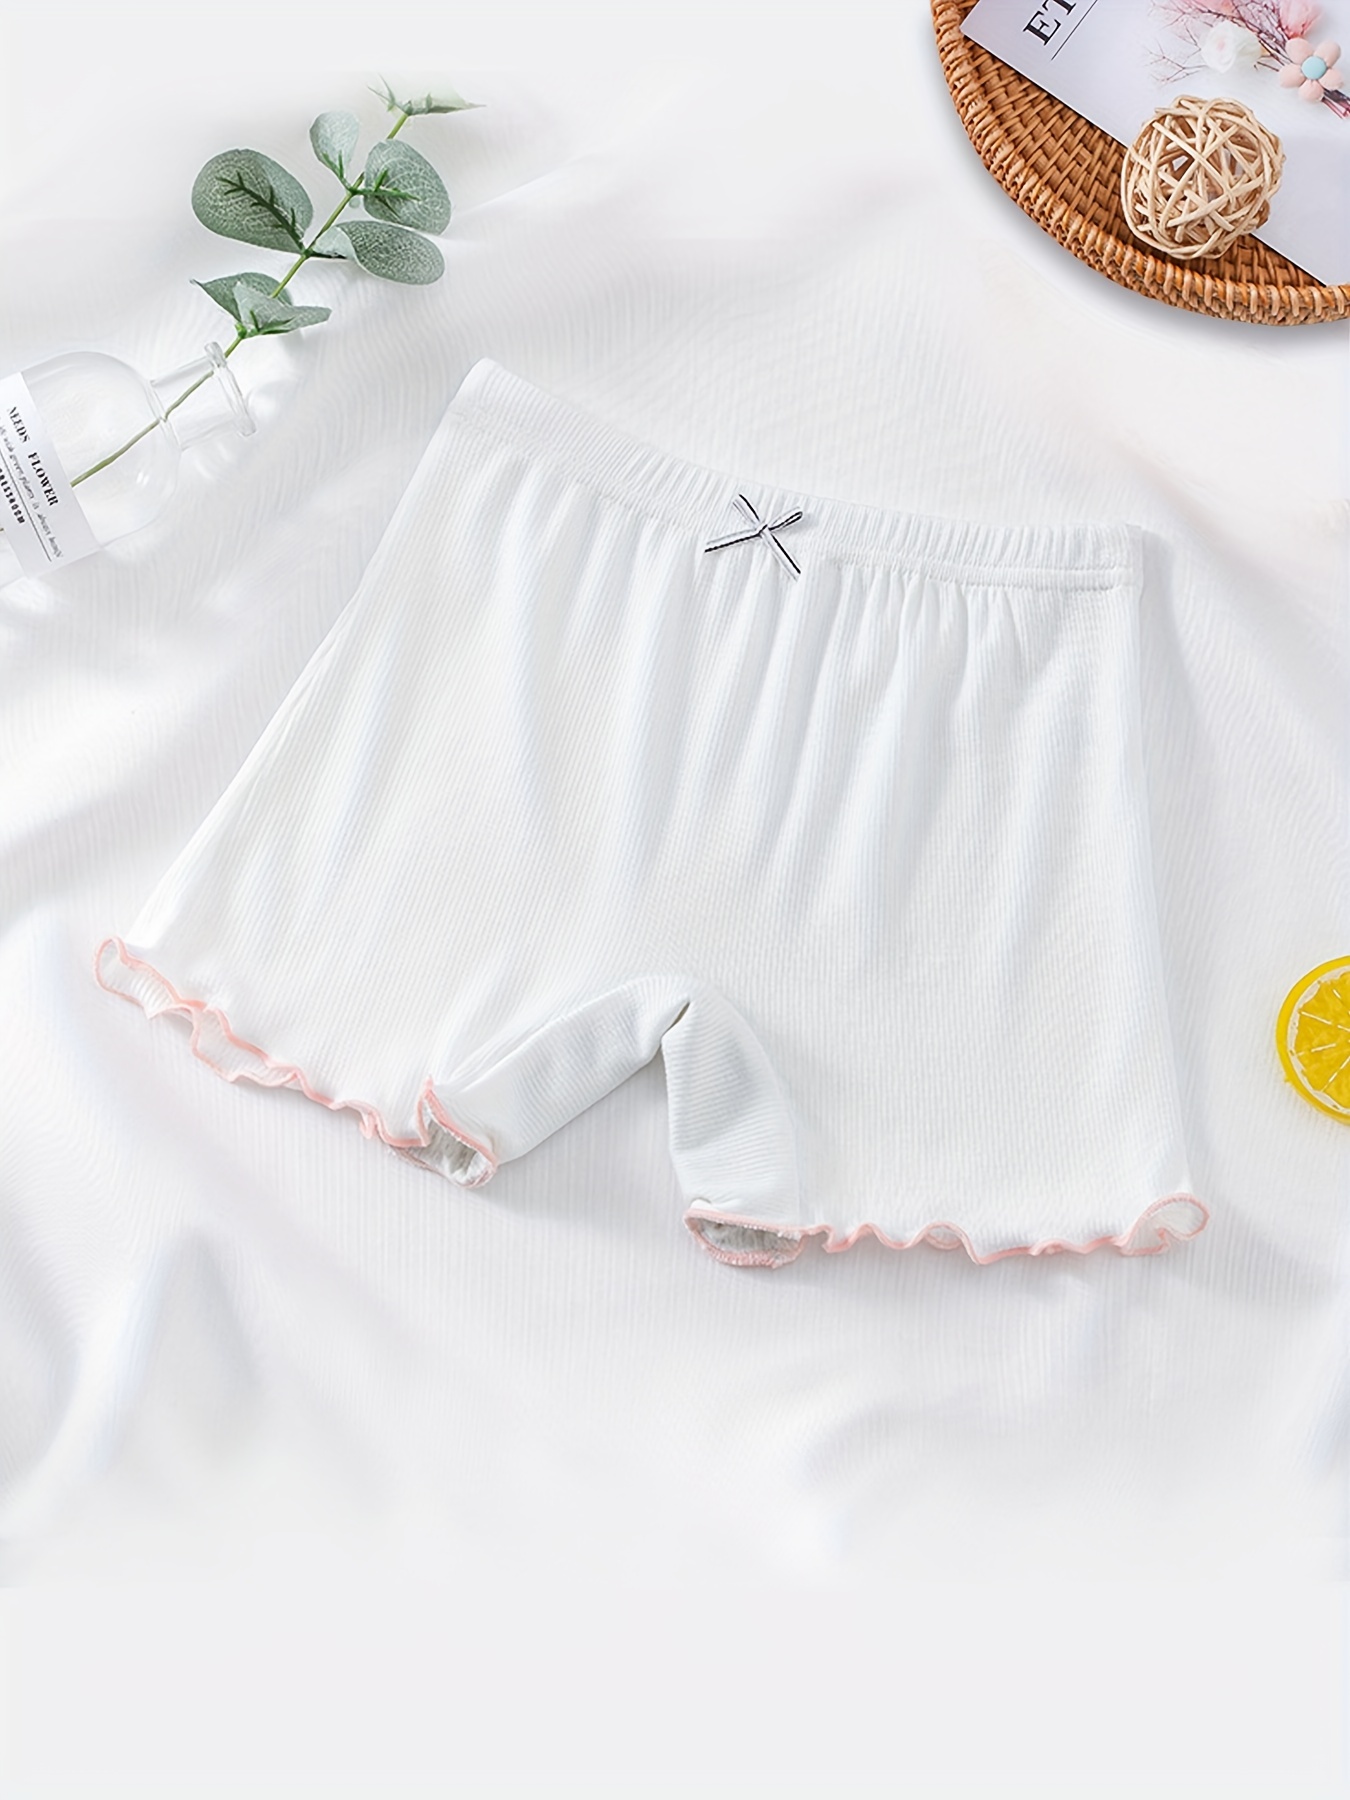 Panties 12 Years Girl Boxers Teen Girls Underwear Bottoms Pant Short Beach  Pants For Children Safety Shorts White2439 From 8,93 €